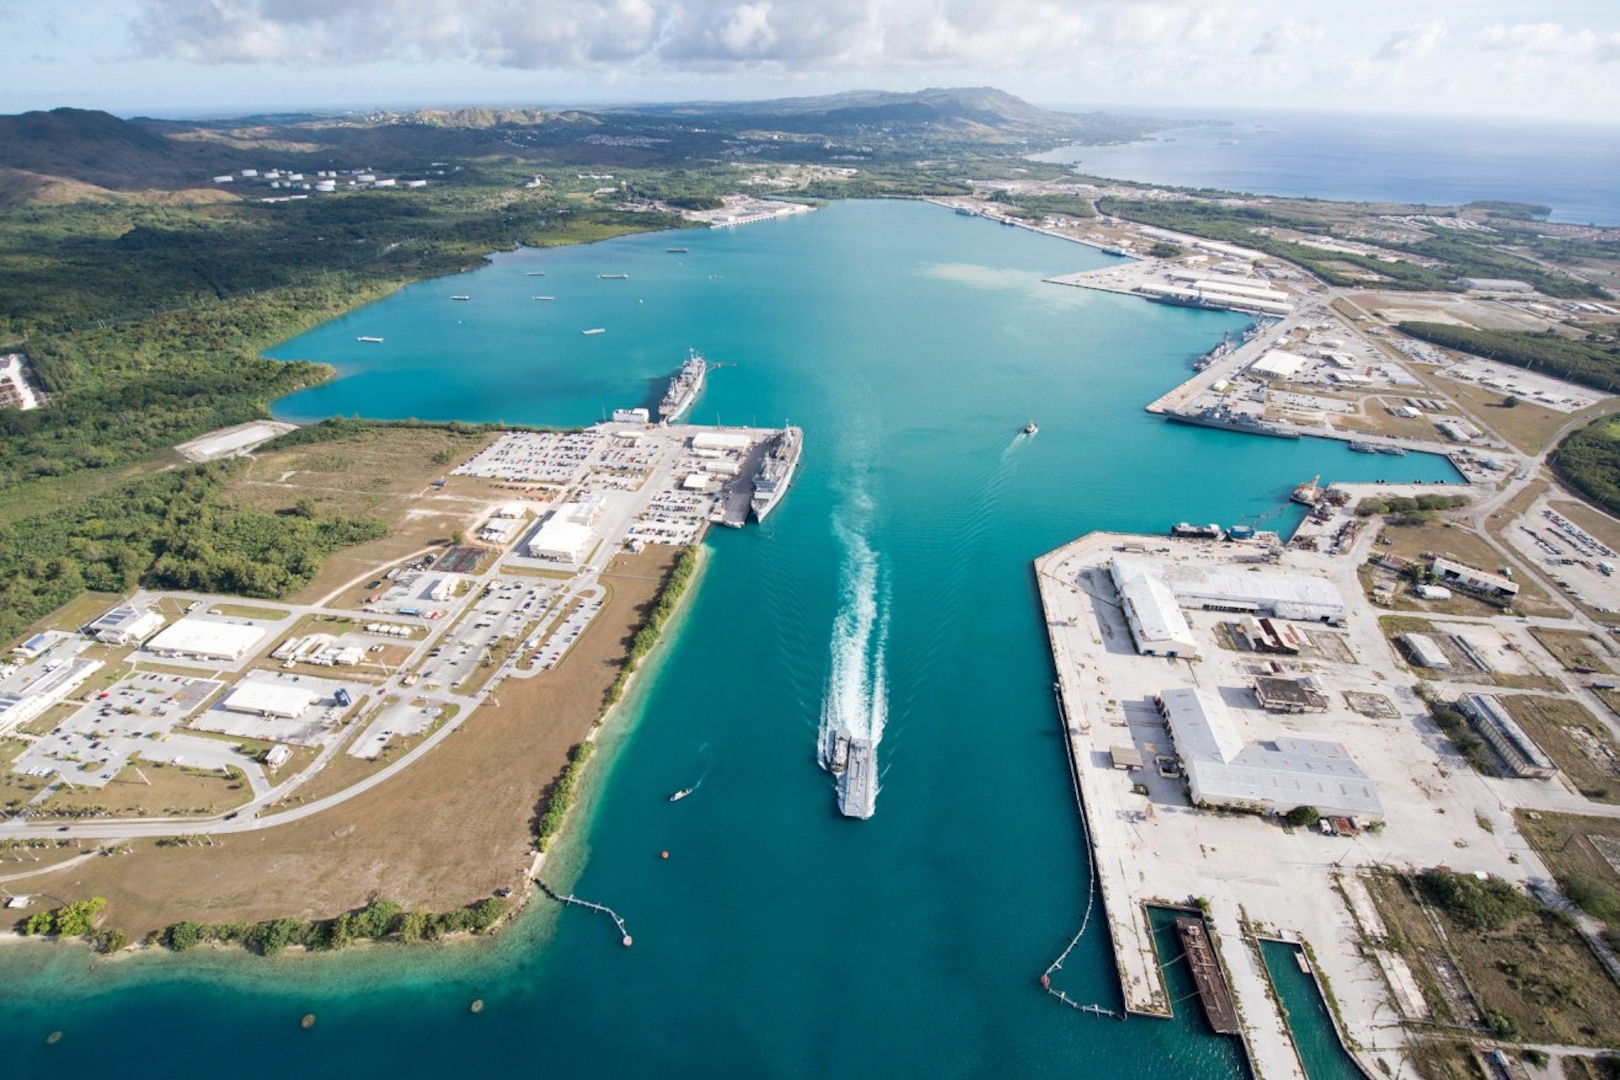 In October 2018, Commander, U.S. Pacific Fleet (COMPACFLT) formally asked Pearl Harbor Naval Shipyard and Intermediate Maintenance Facility (PHNSY & IMF) and Commander Submarine Forces Pacific (COMSUBPAC) to complete a study and provide requirements to close the existing maintenance gaps in executing submarine maintenance in Guam. The island’s strategic location would be the focus of this initiative; however, leadership knew there would be hurdles to overcome due to its remote location.